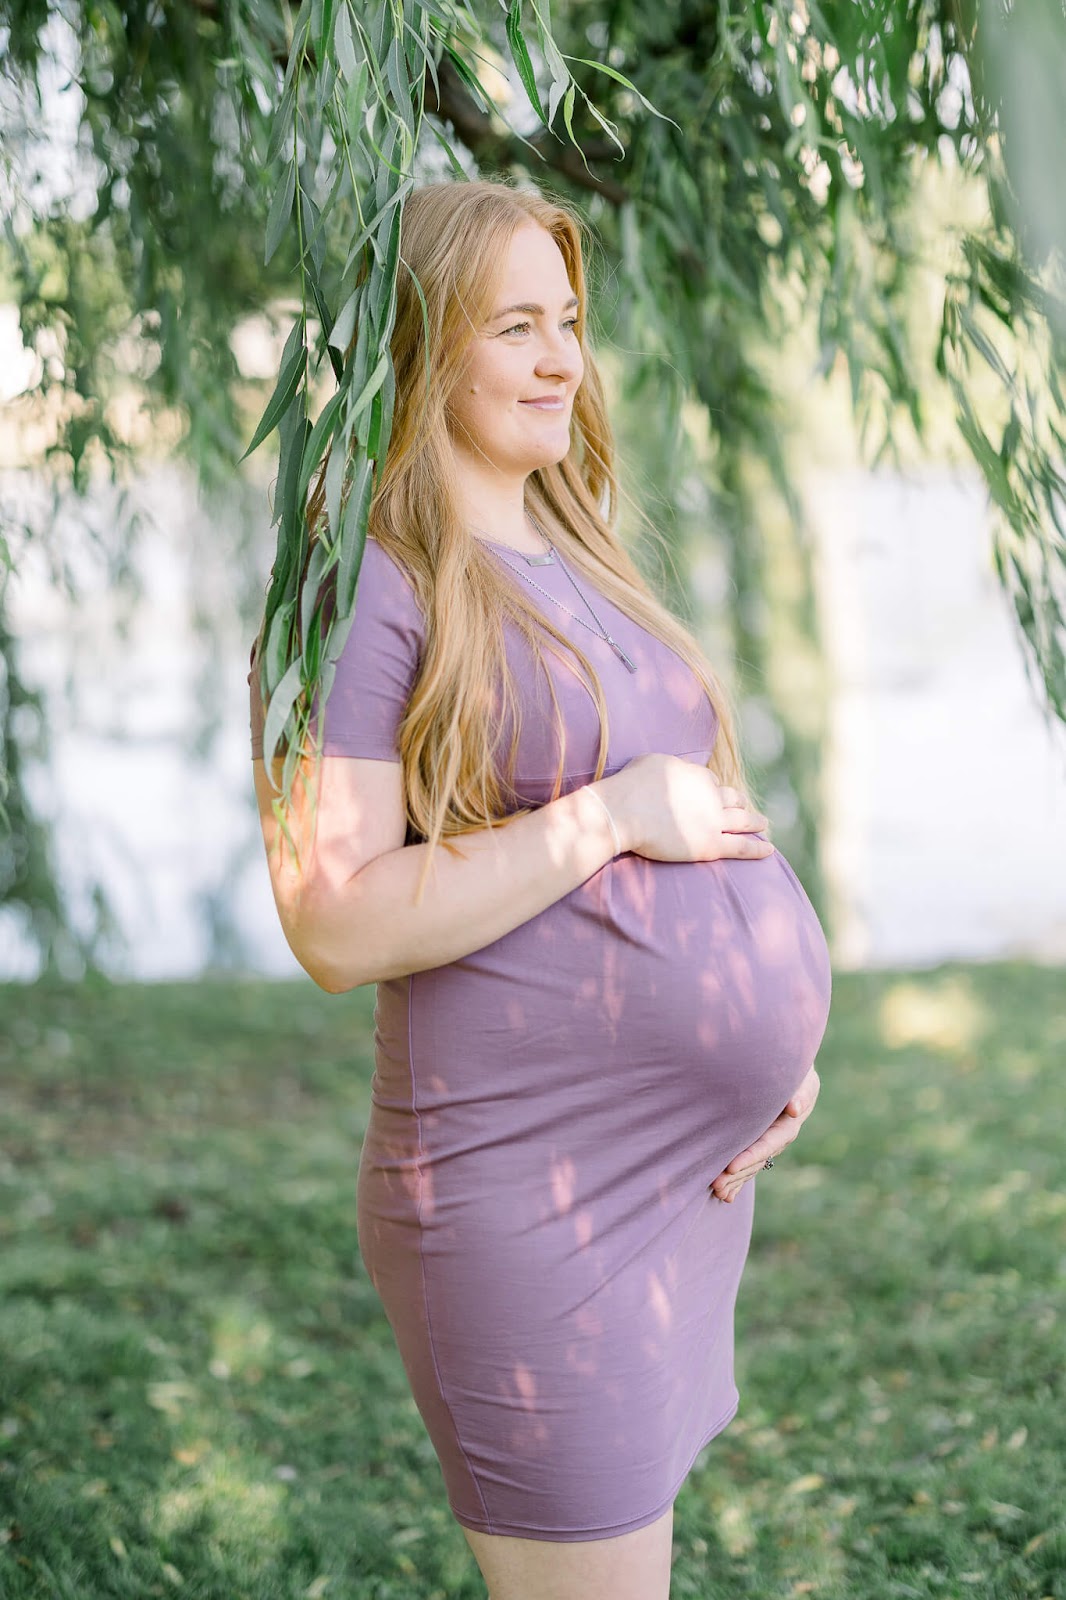 Pregnant woman posing under a tree